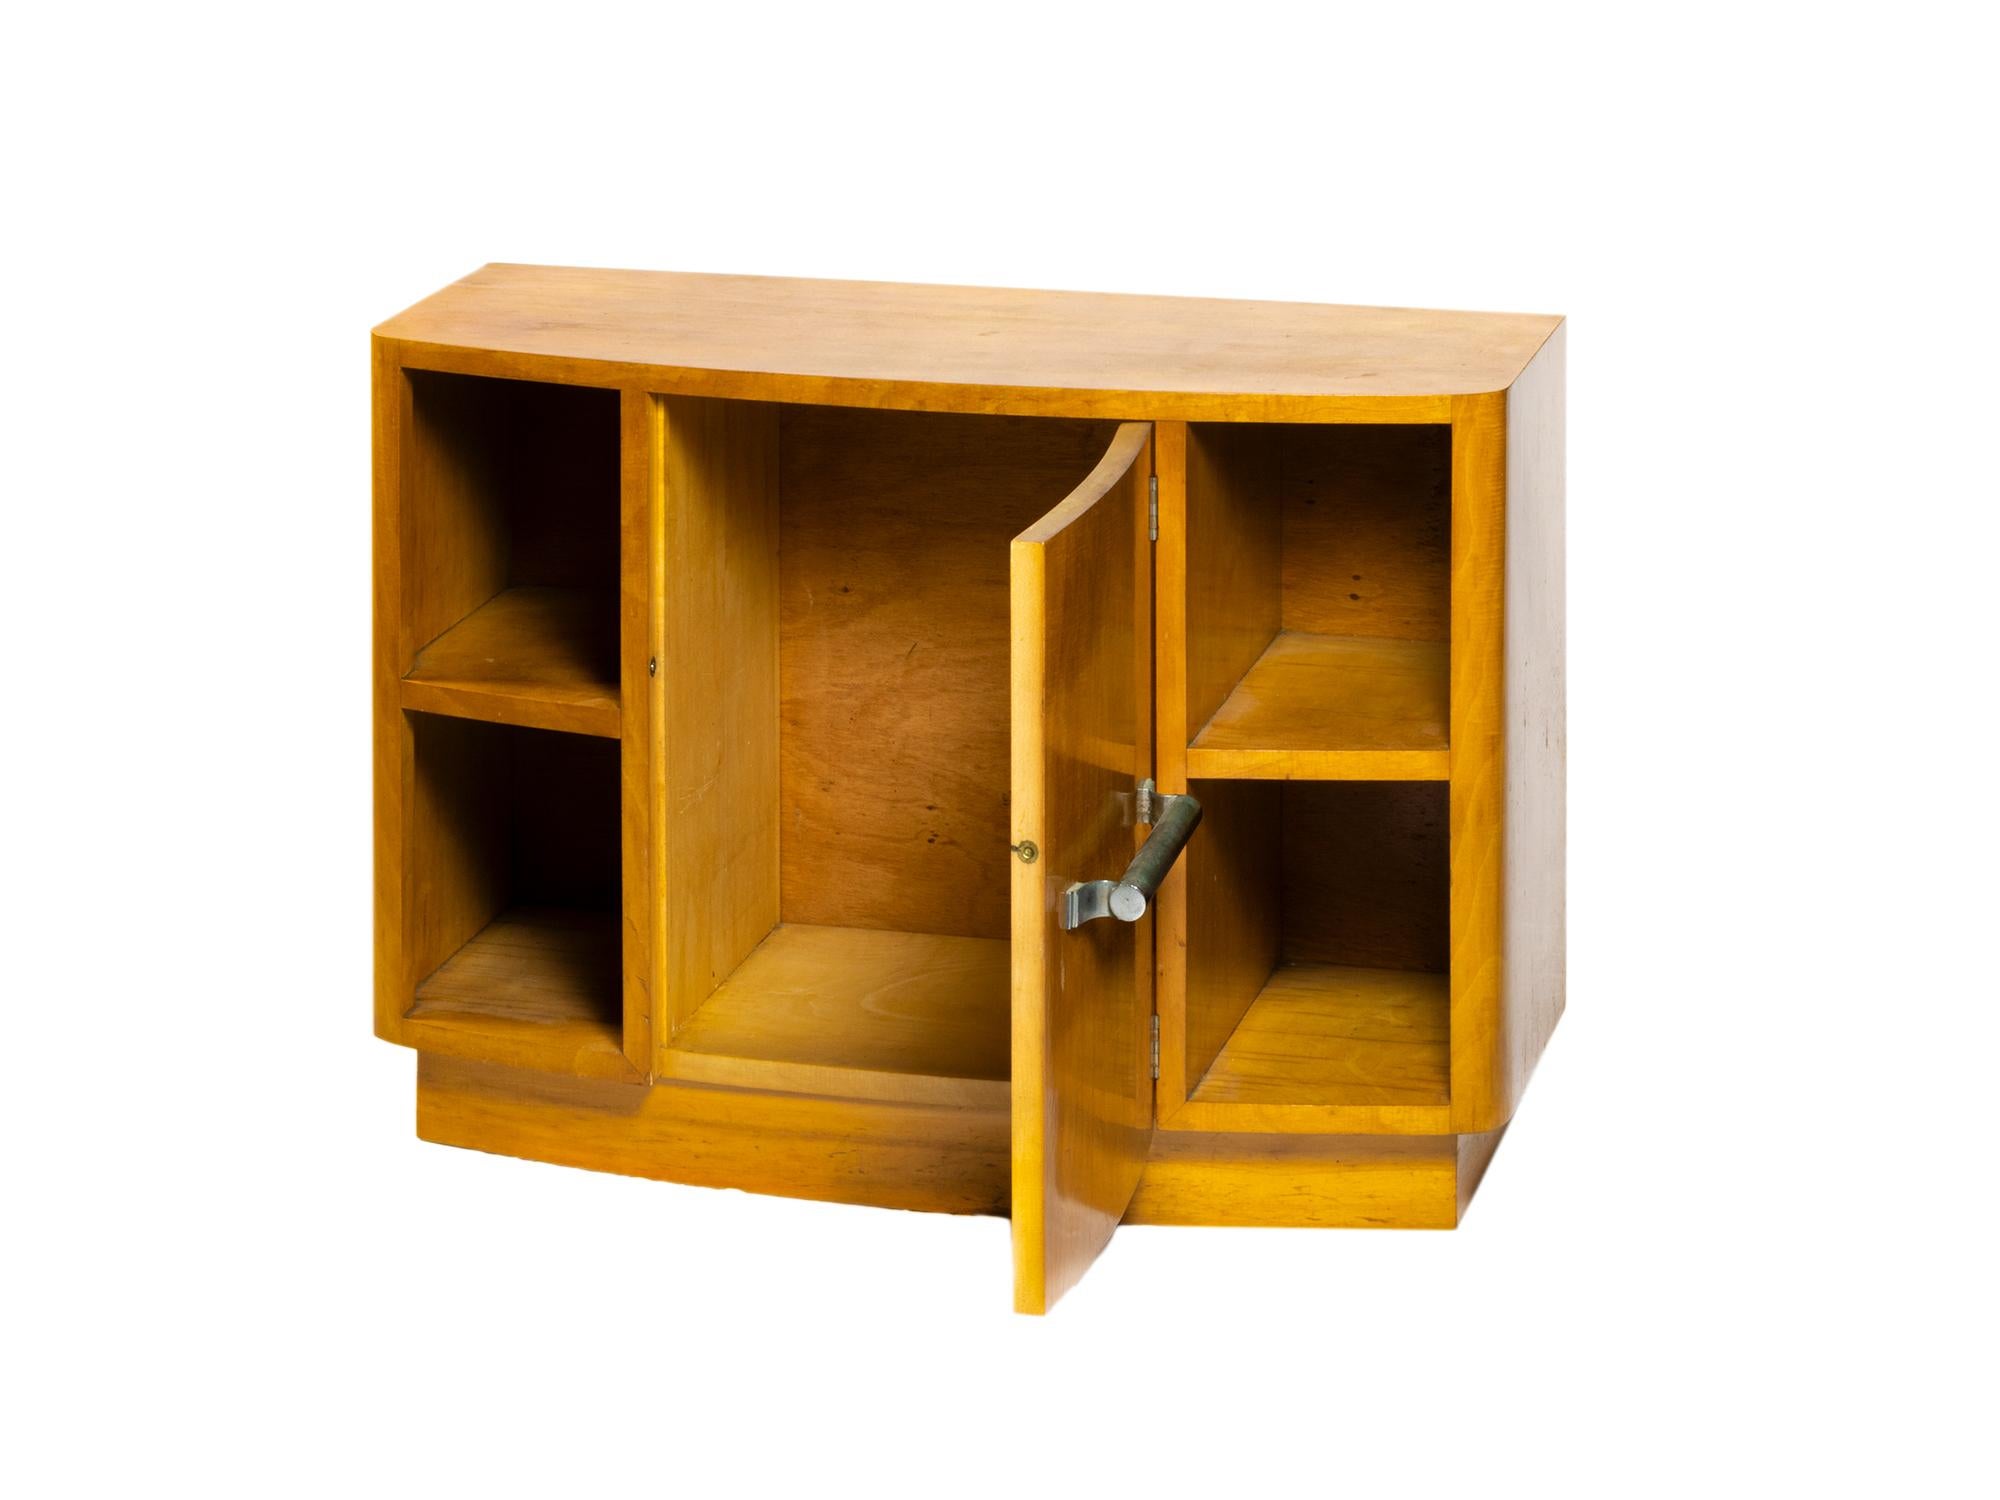 An elegant spruce wood light color support piece with four bookcases and a large door. 
Small piece with tin hardware.
Order, color, geometry, words that define the Art Deco world.
In Portugal examples like this one were created for refurbishing the